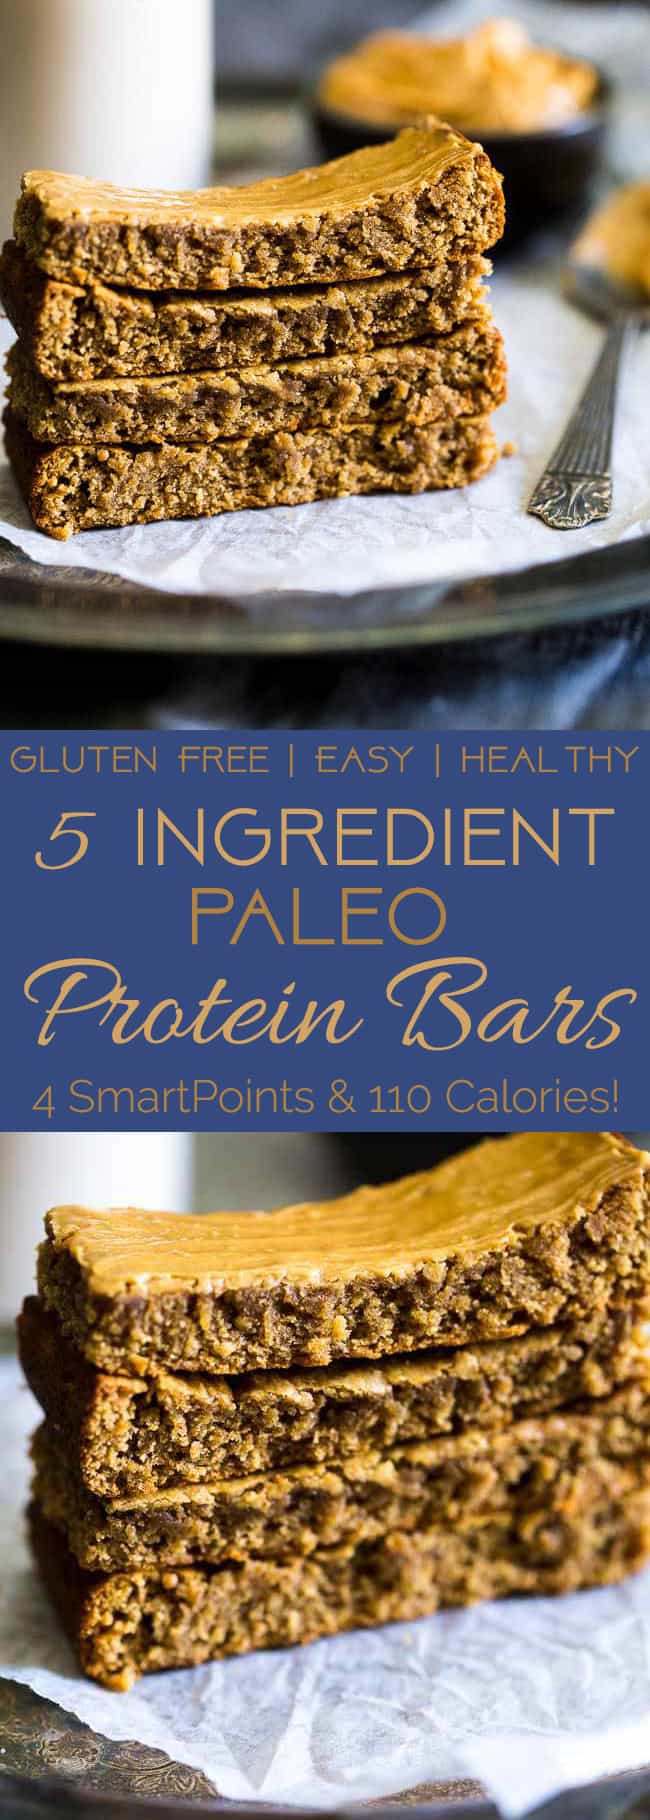 Paleo Protein Bar Recipe - 5 ingredients, one bowl and 20 minutes is all you need to make these soft and chewy bars! The a healthy, portable snack! | Foodfaithfitness.com | @FoodFaithFit | low carb paleo protein bars. homemade paleo protein bars. clean eating paleo protein bars. paleo snacks. easy paleo protein bars. Easy protein bars. gluten free protein bars. post work protein bars. protein bars recipe.